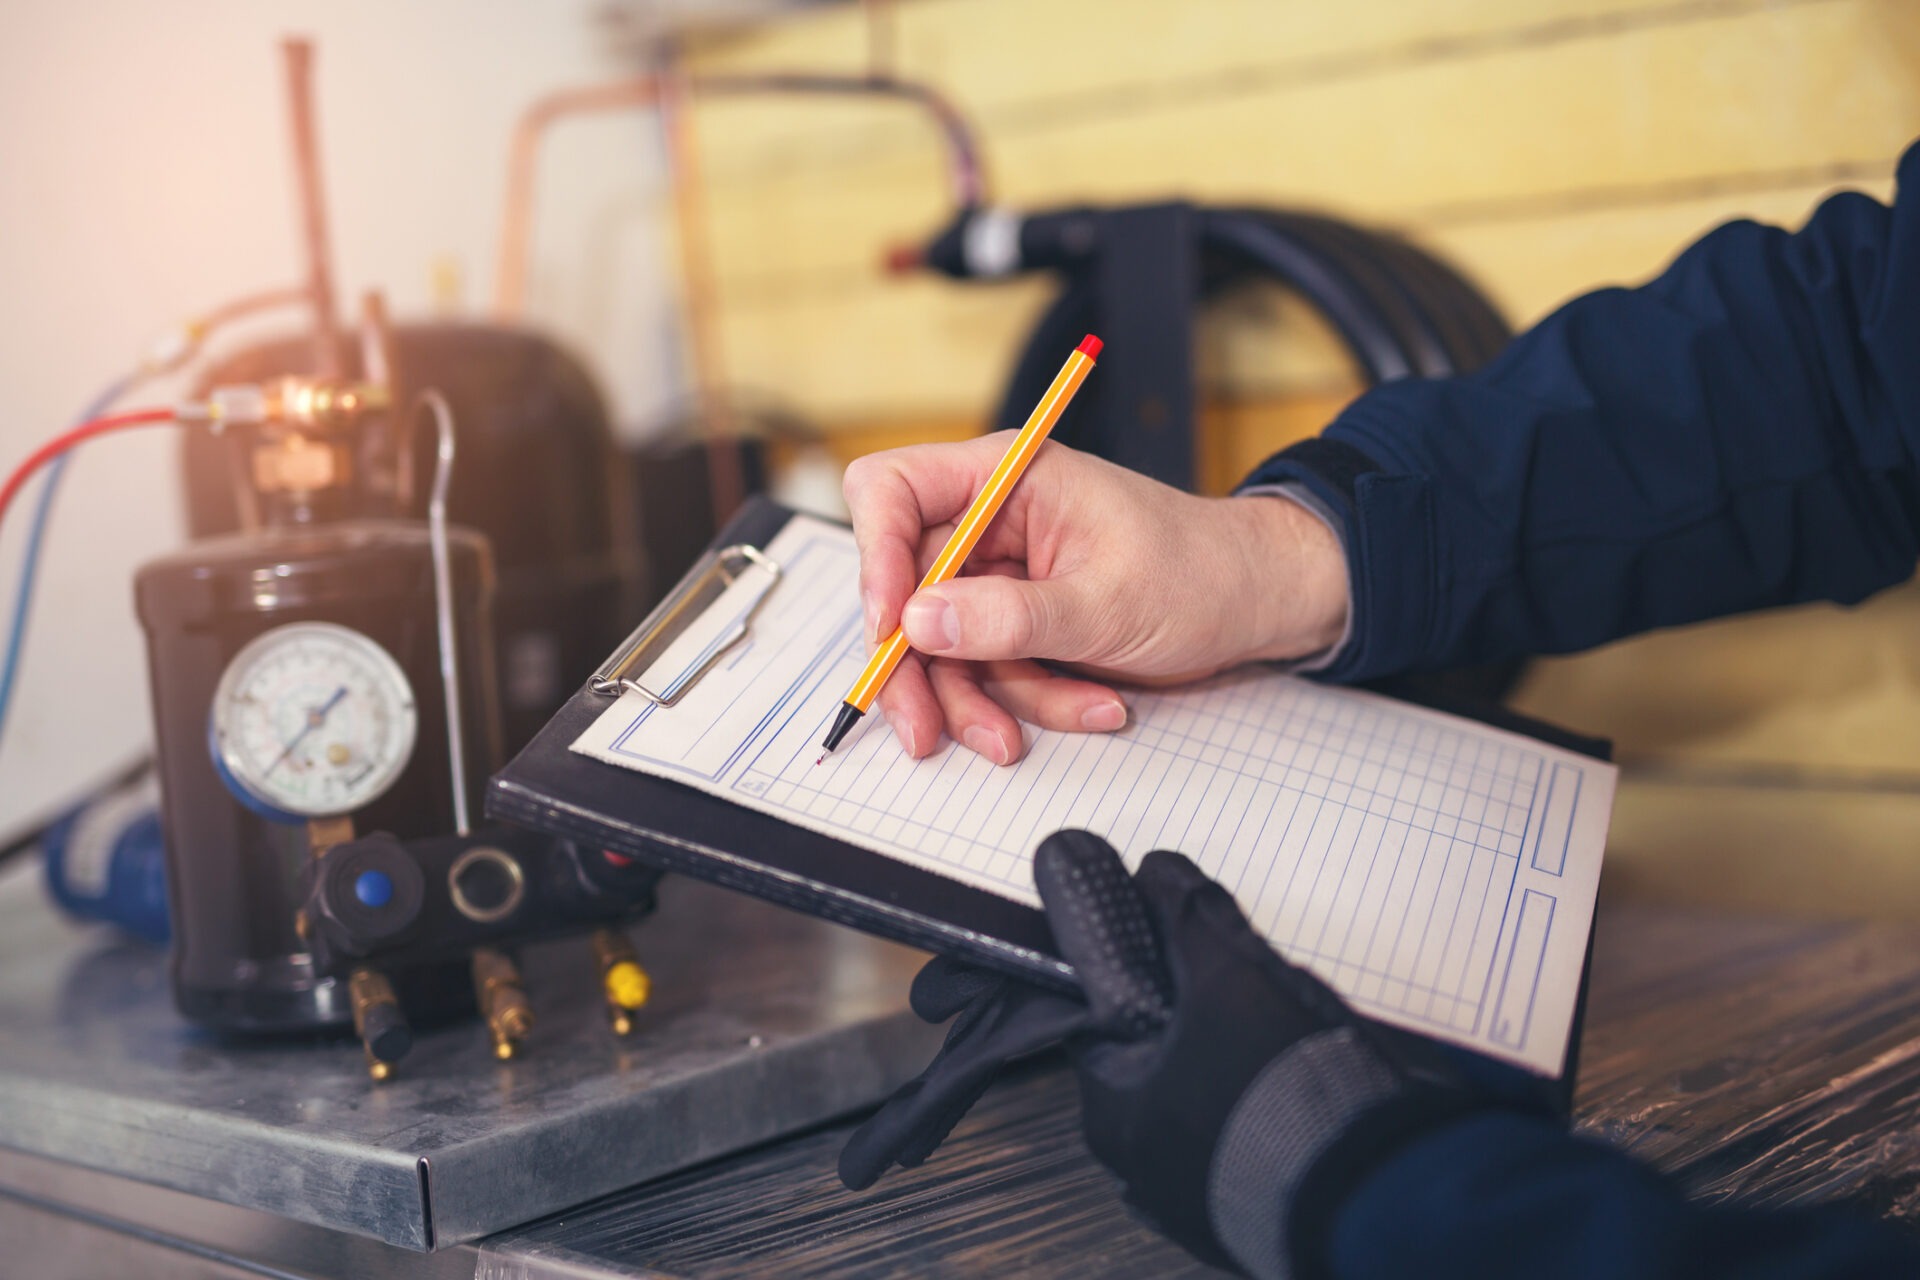 A person is writing on a clipboard with a pencil near HVAC equipment, possibly performing maintenance or checking system operations with focus on precision.